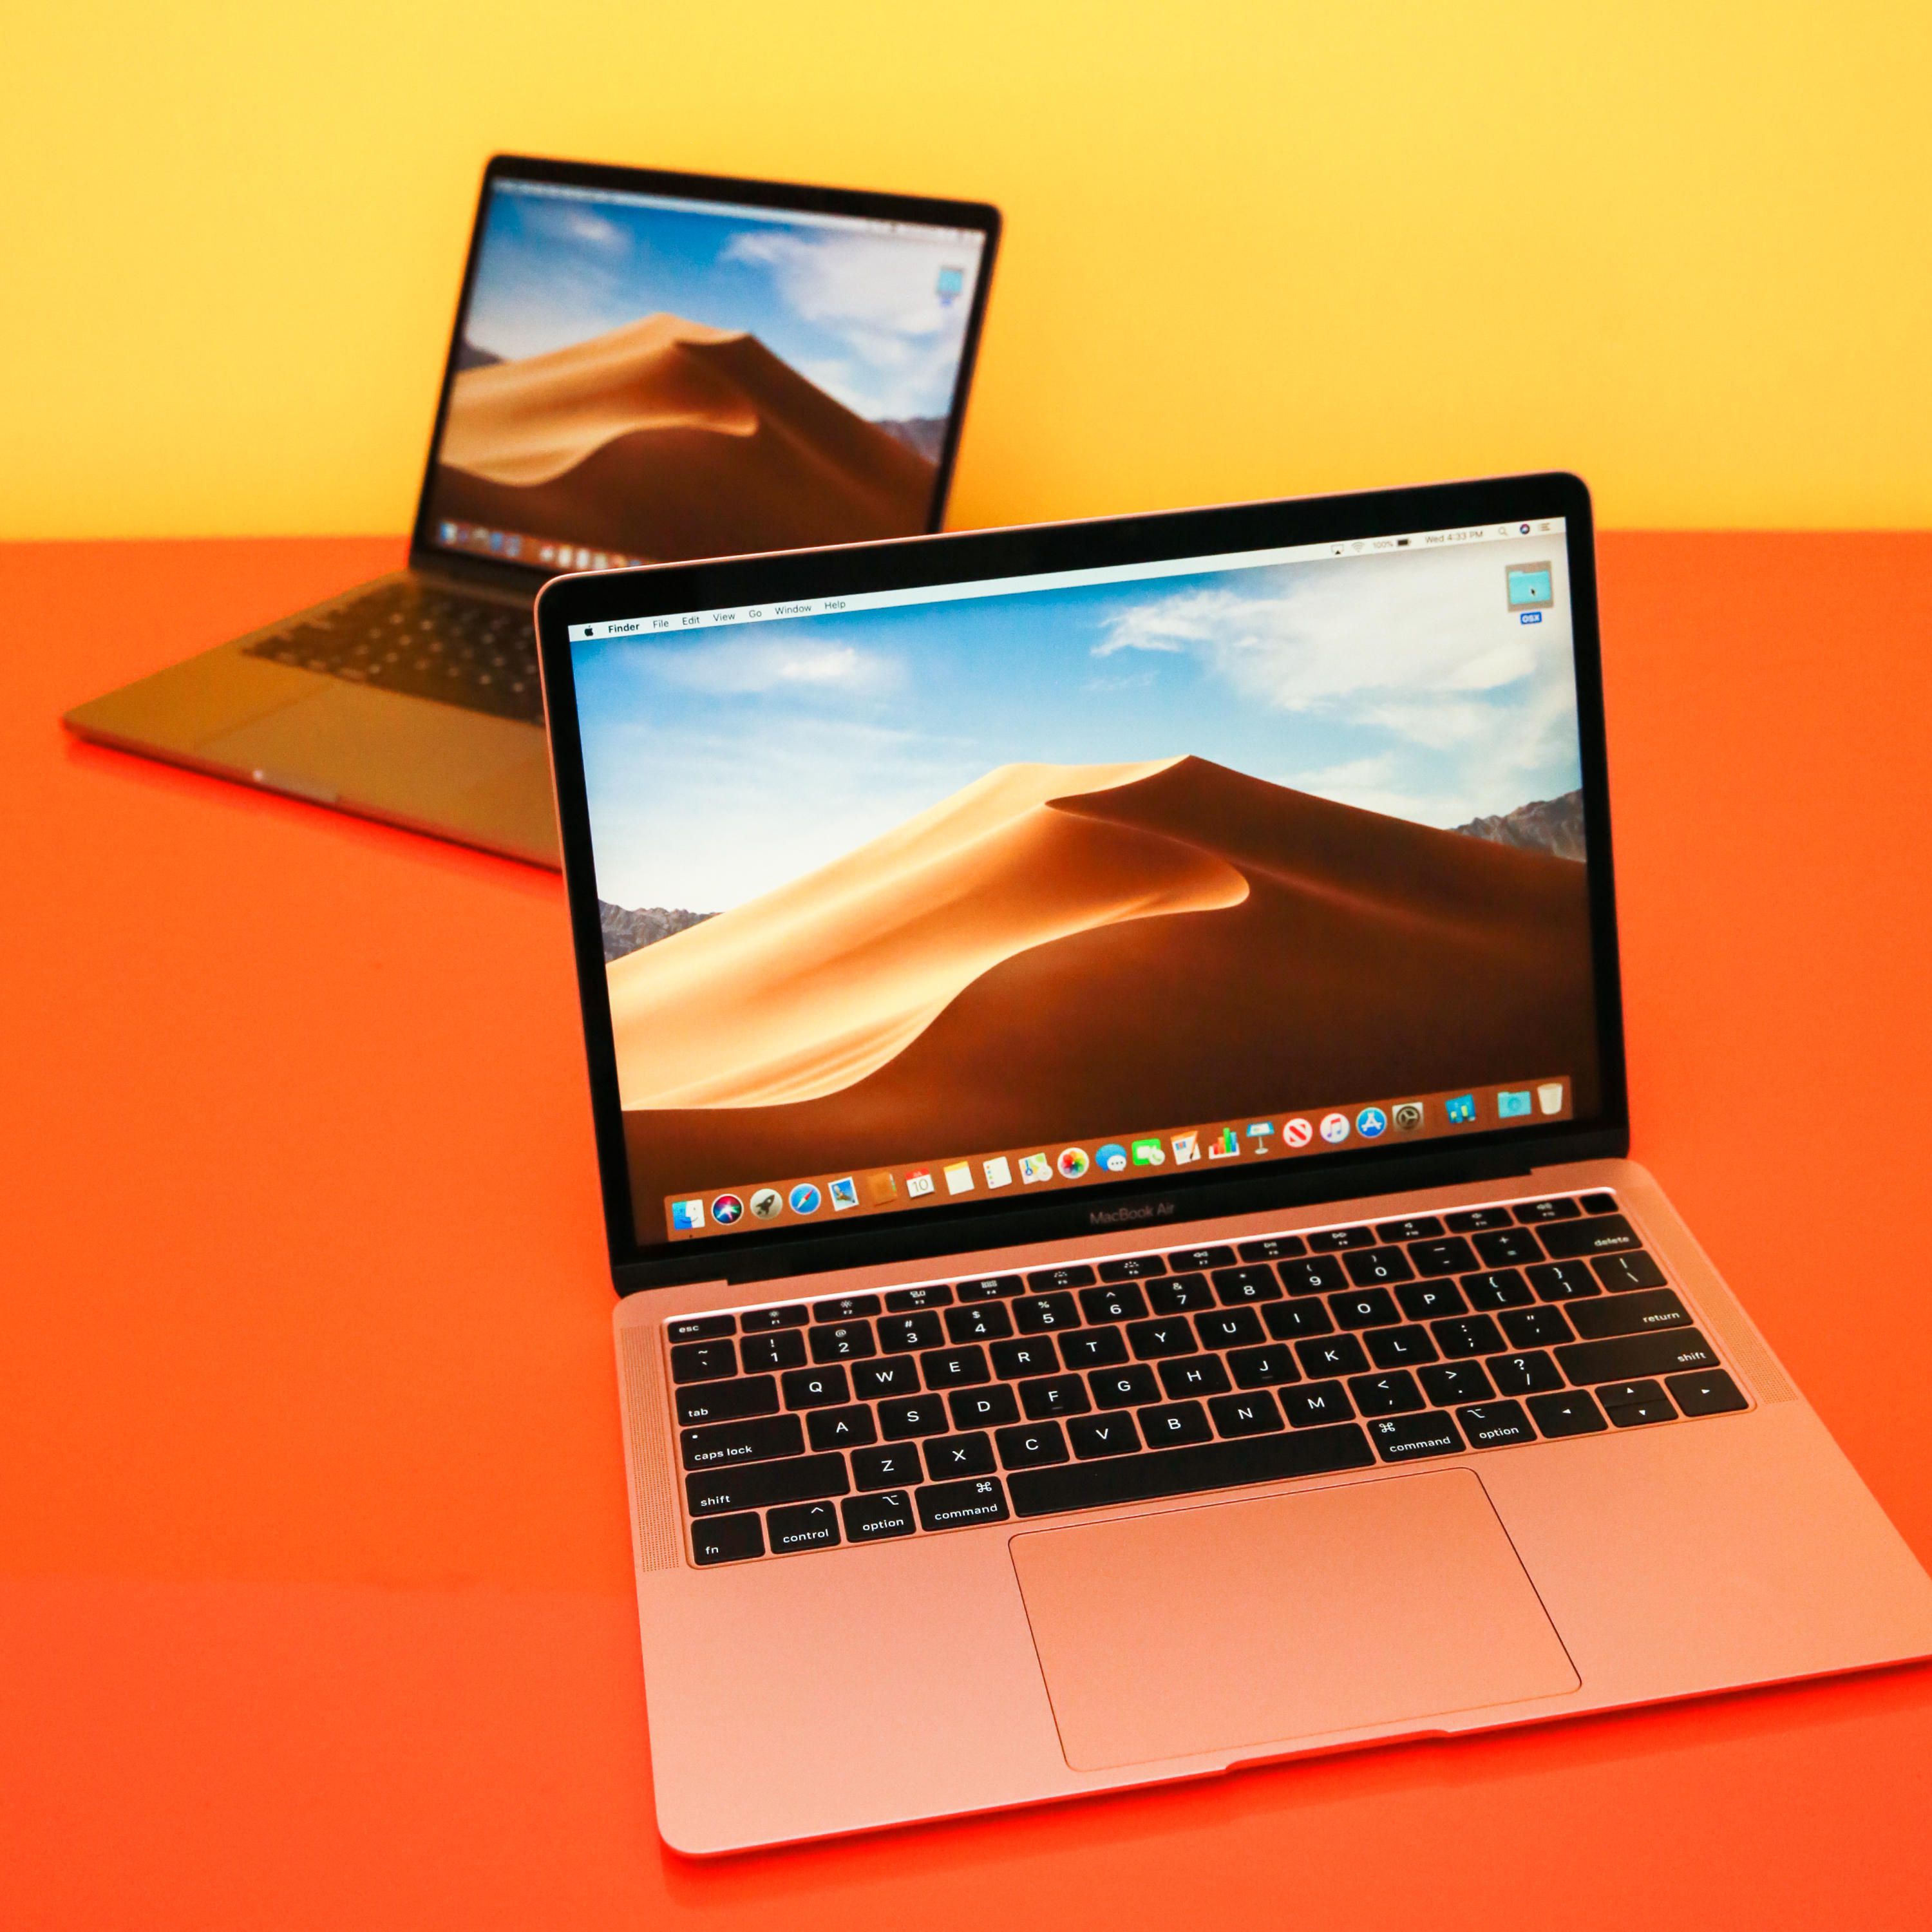 Apple's ARM-based MacBook Air will reputedly launch at US$799 with the